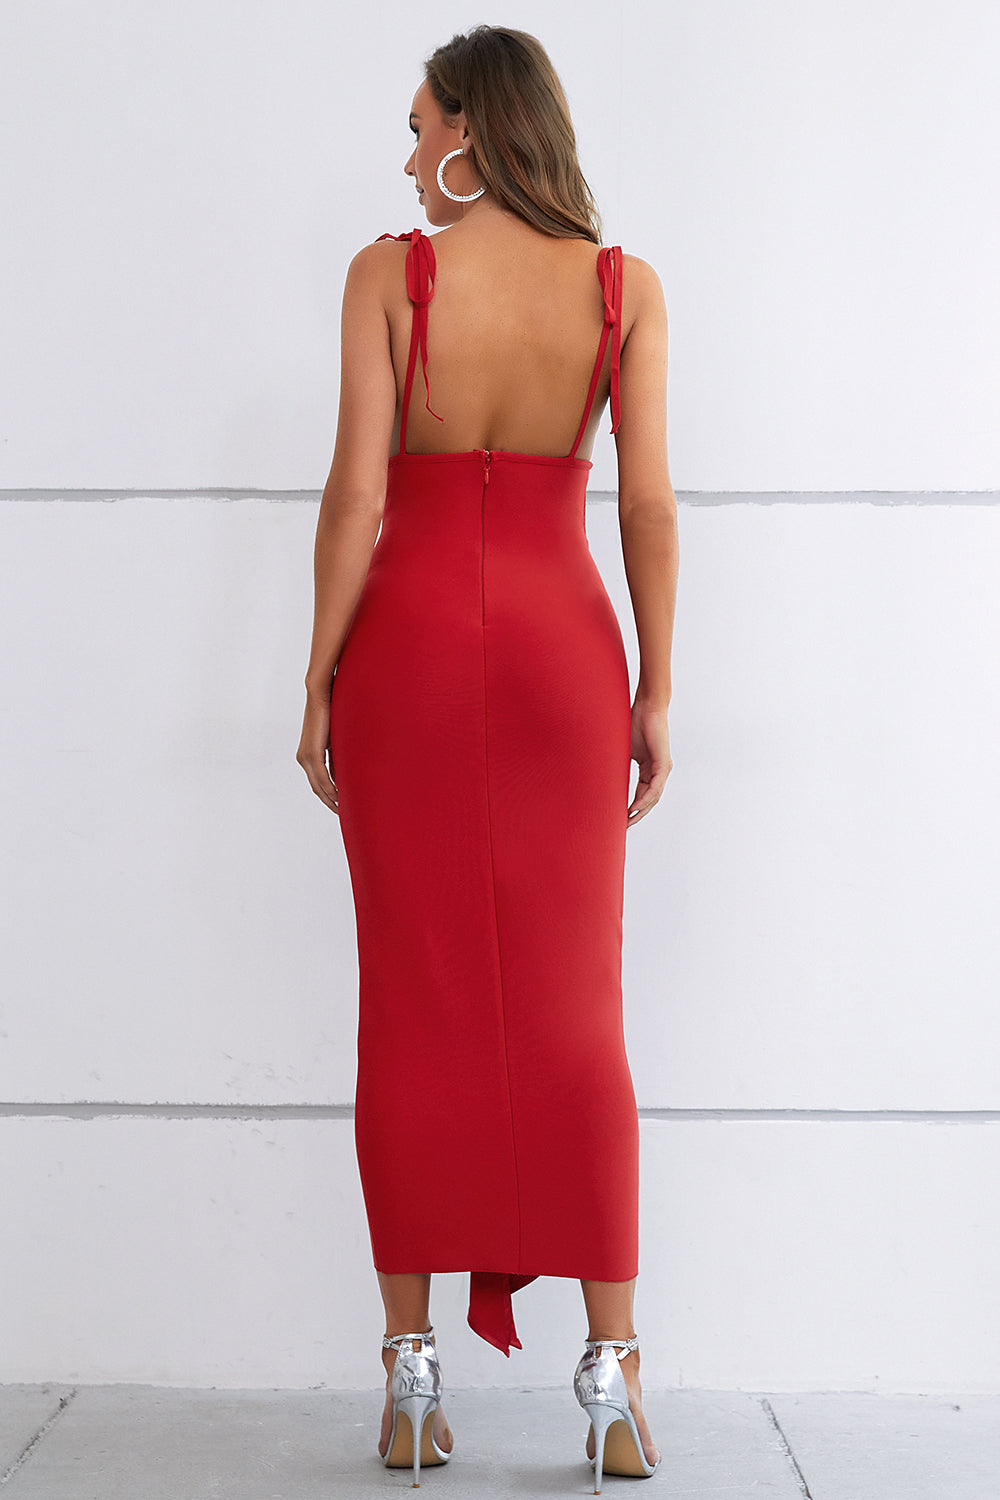 Sesidy Vidonia Plunging Draped Evening Dress in Red